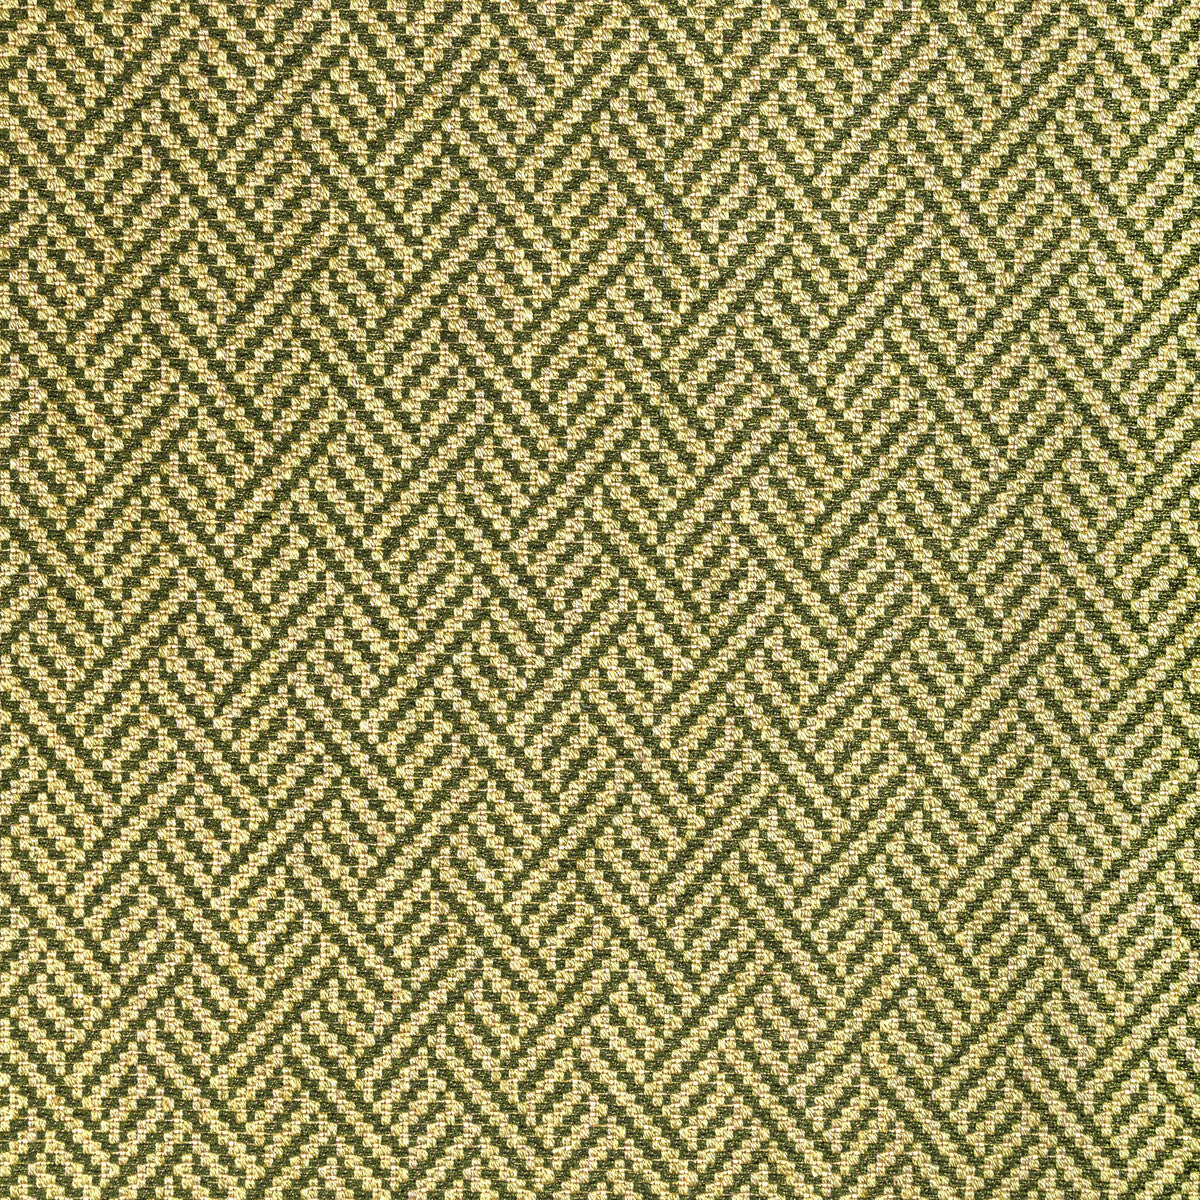 Colbert Weave fabric in green color - pattern 8022108.30.0 - by Brunschwig &amp; Fils in the Lorient Weaves collection